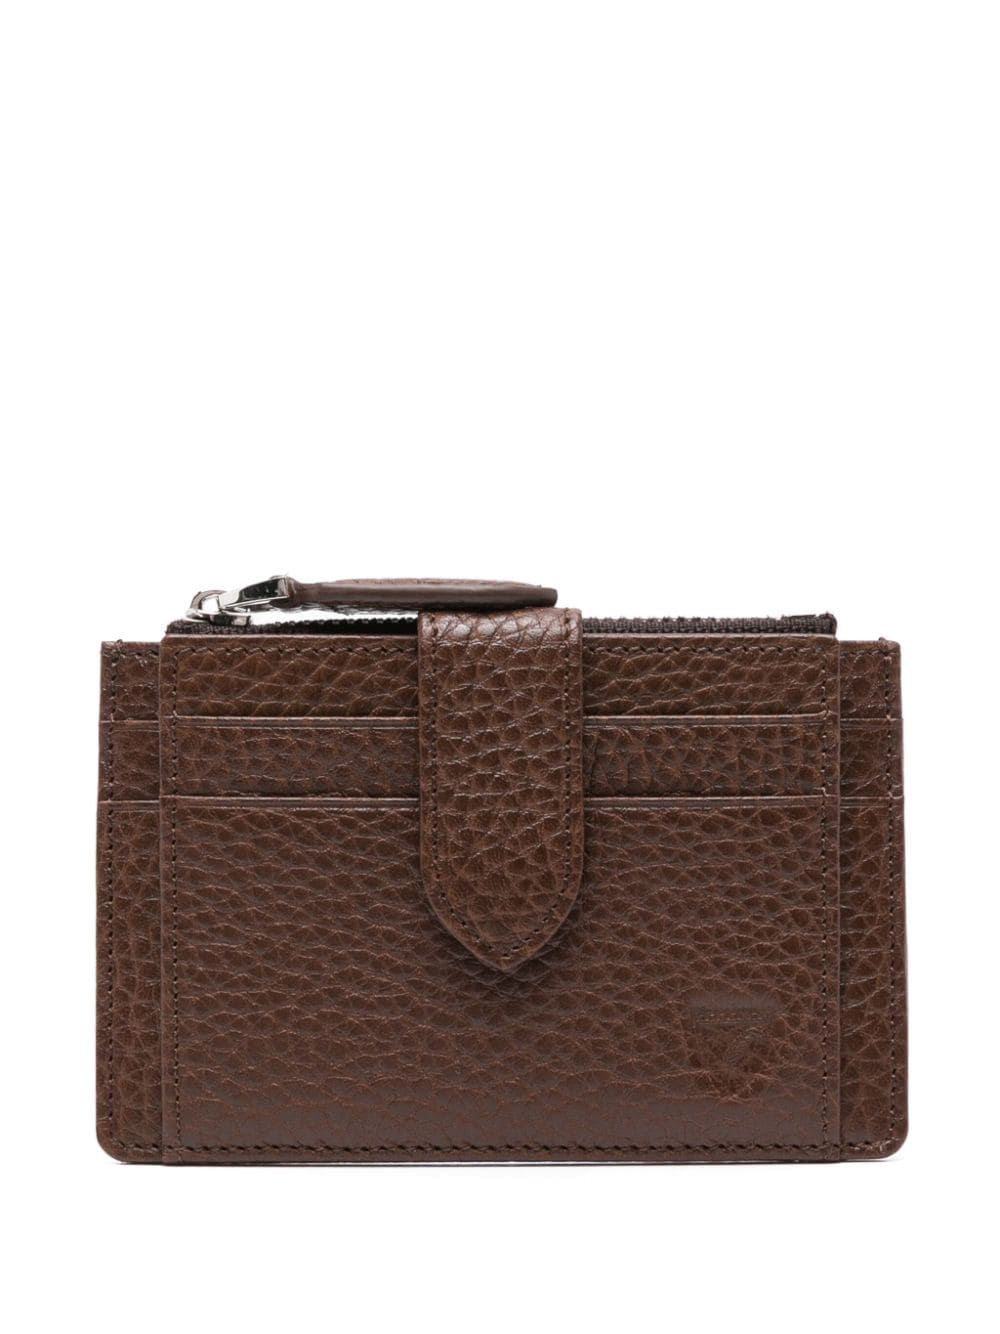 Aspinal Of London logo-stamp leather wallet - Brown von Aspinal Of London